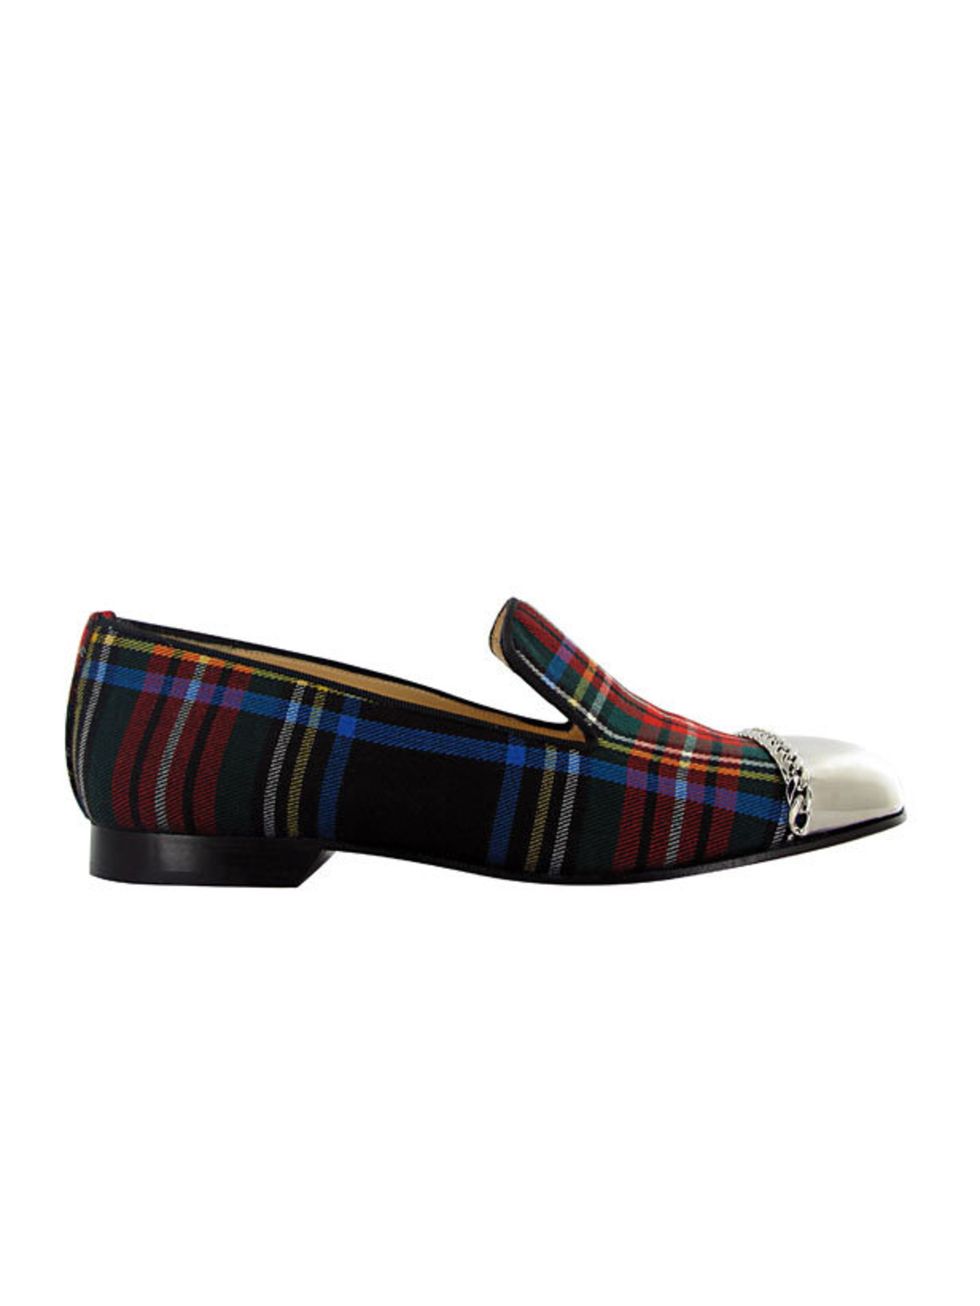 <p>Christian Louboutin tartan loafers, £635, for stockists call 0207 491 0033</p>